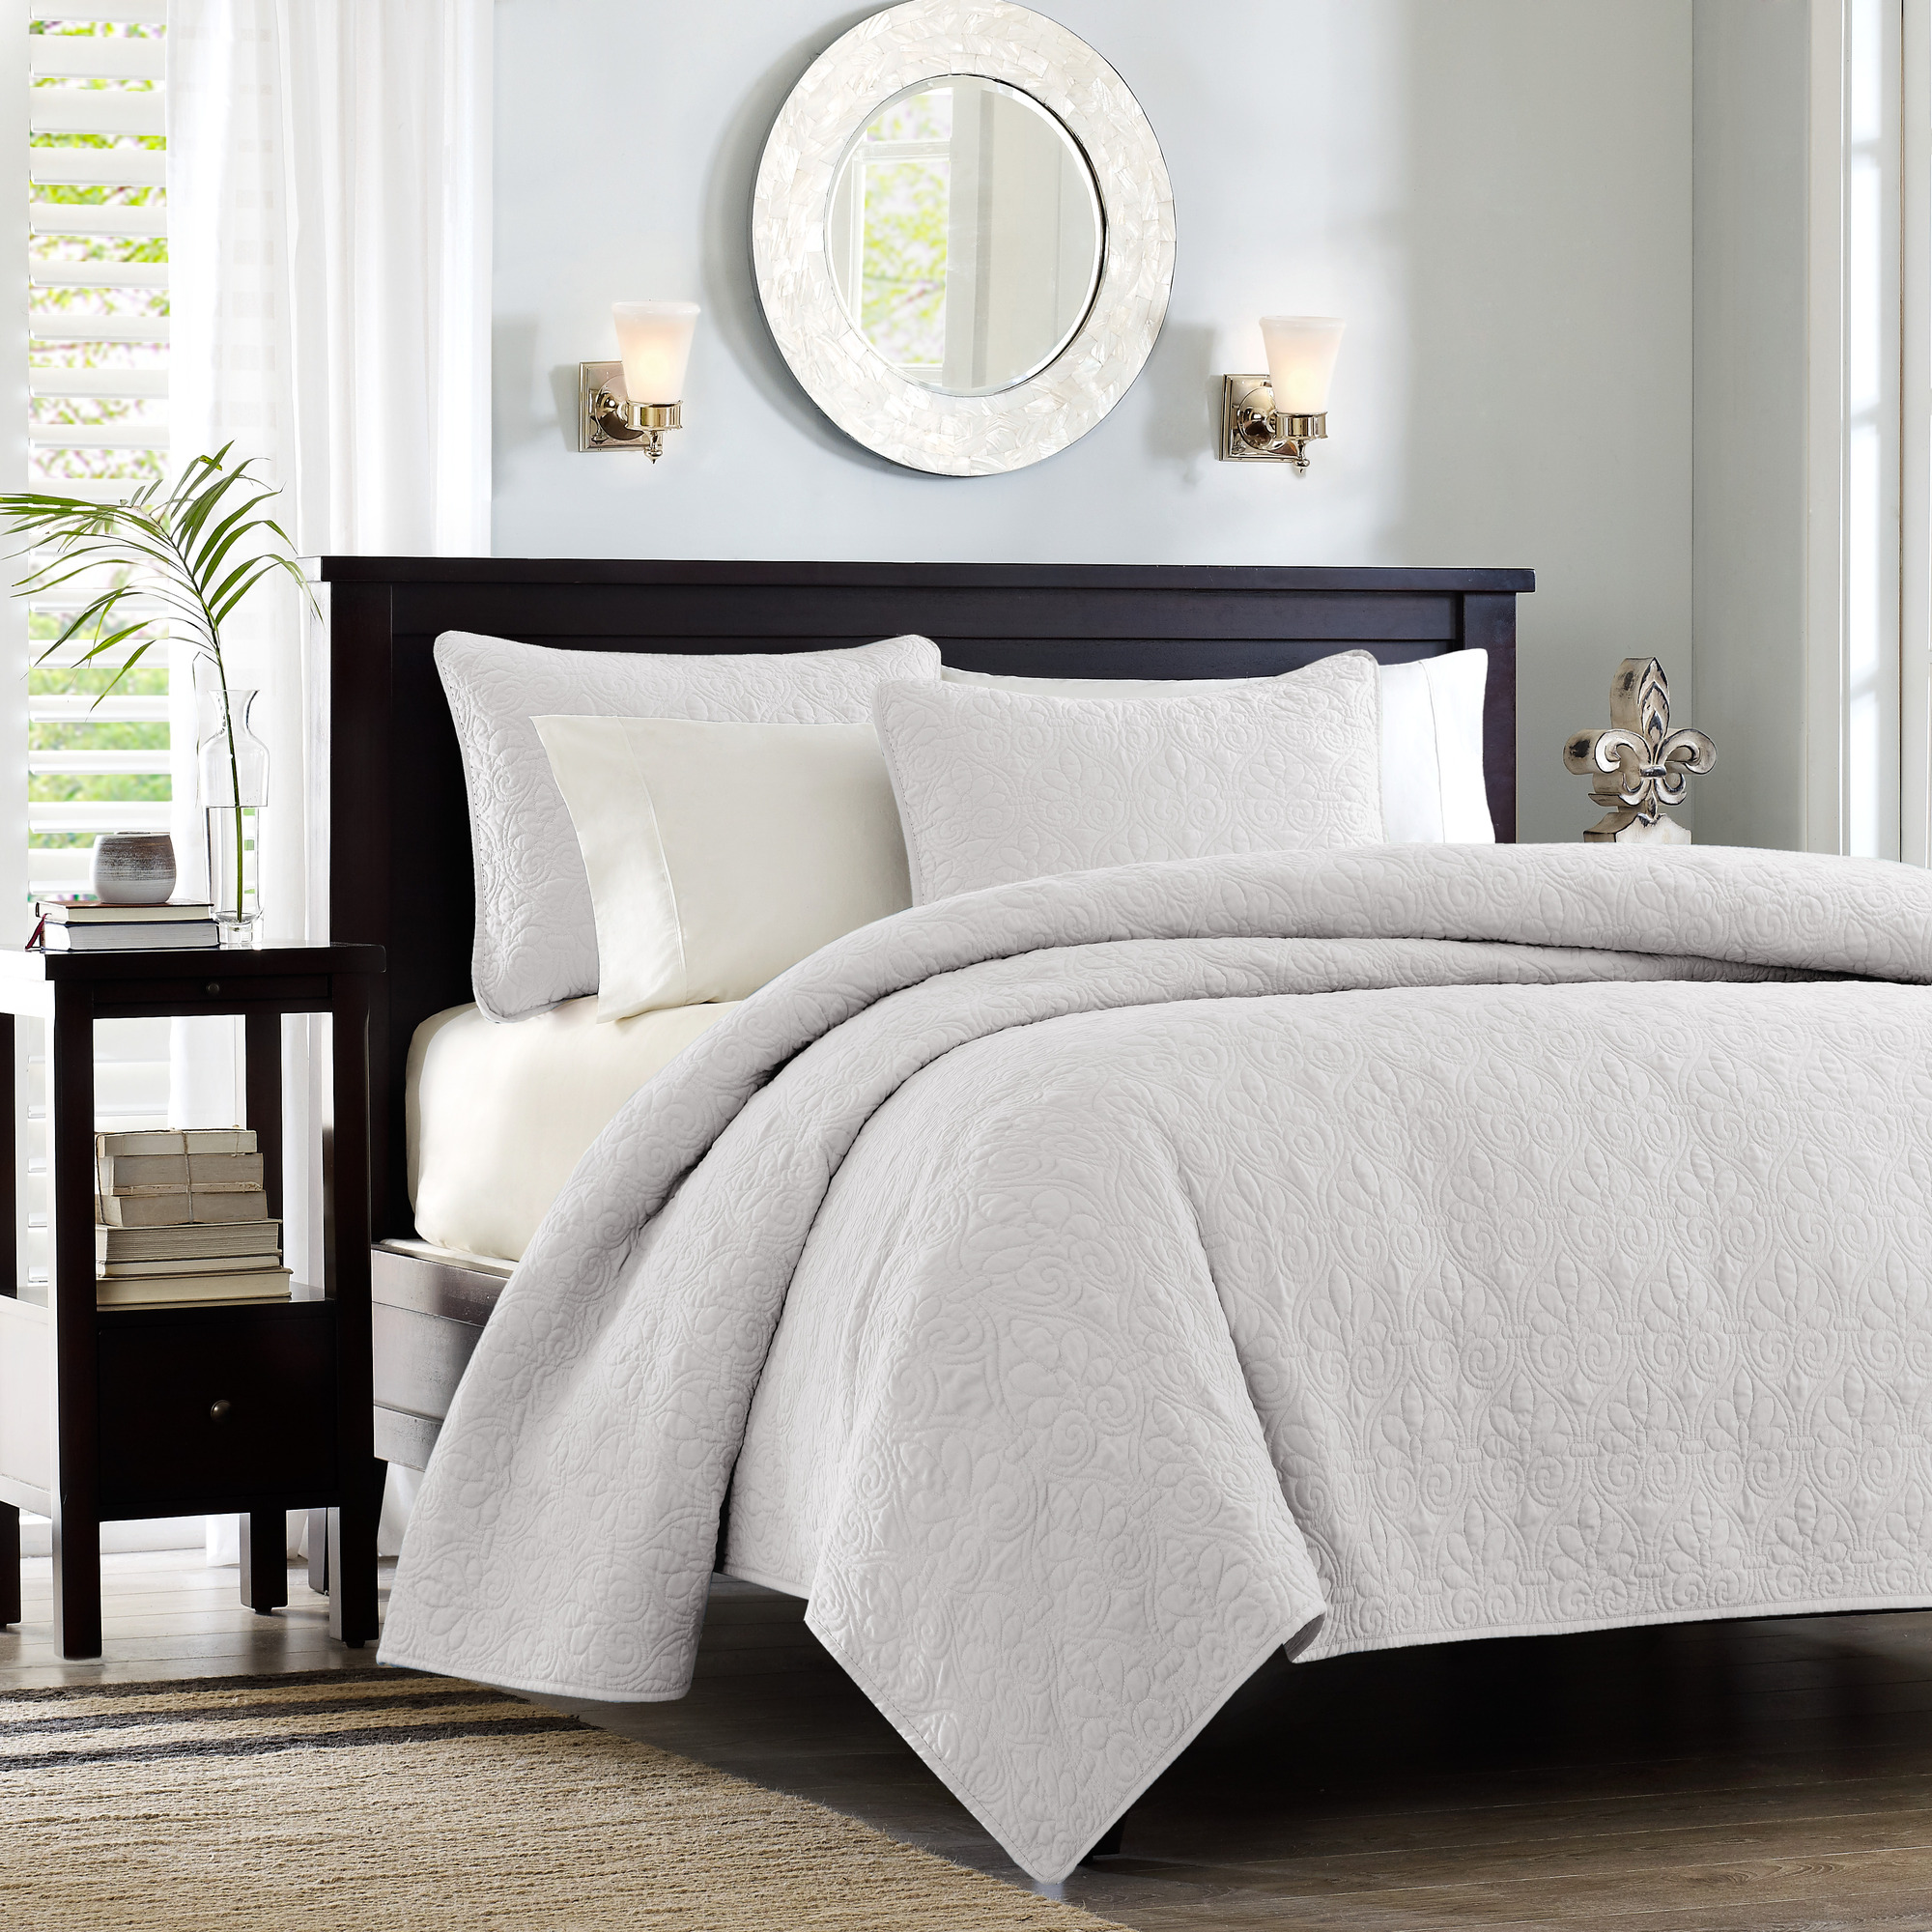 Home Essence Vancouver Super Soft Reversible Coverlet Set, Full/Queen, White - image 1 of 14